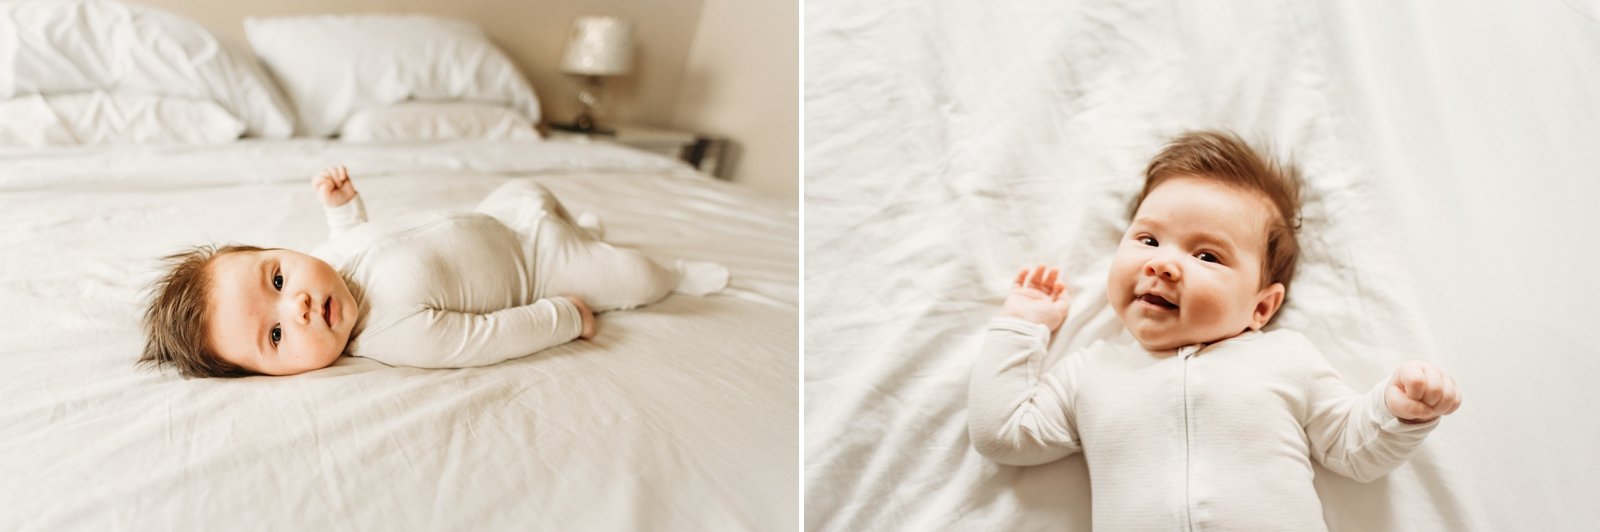 Dublin Newborn Lifestyle Photographer At home photoshoot Young Soul Photography  9.jpg